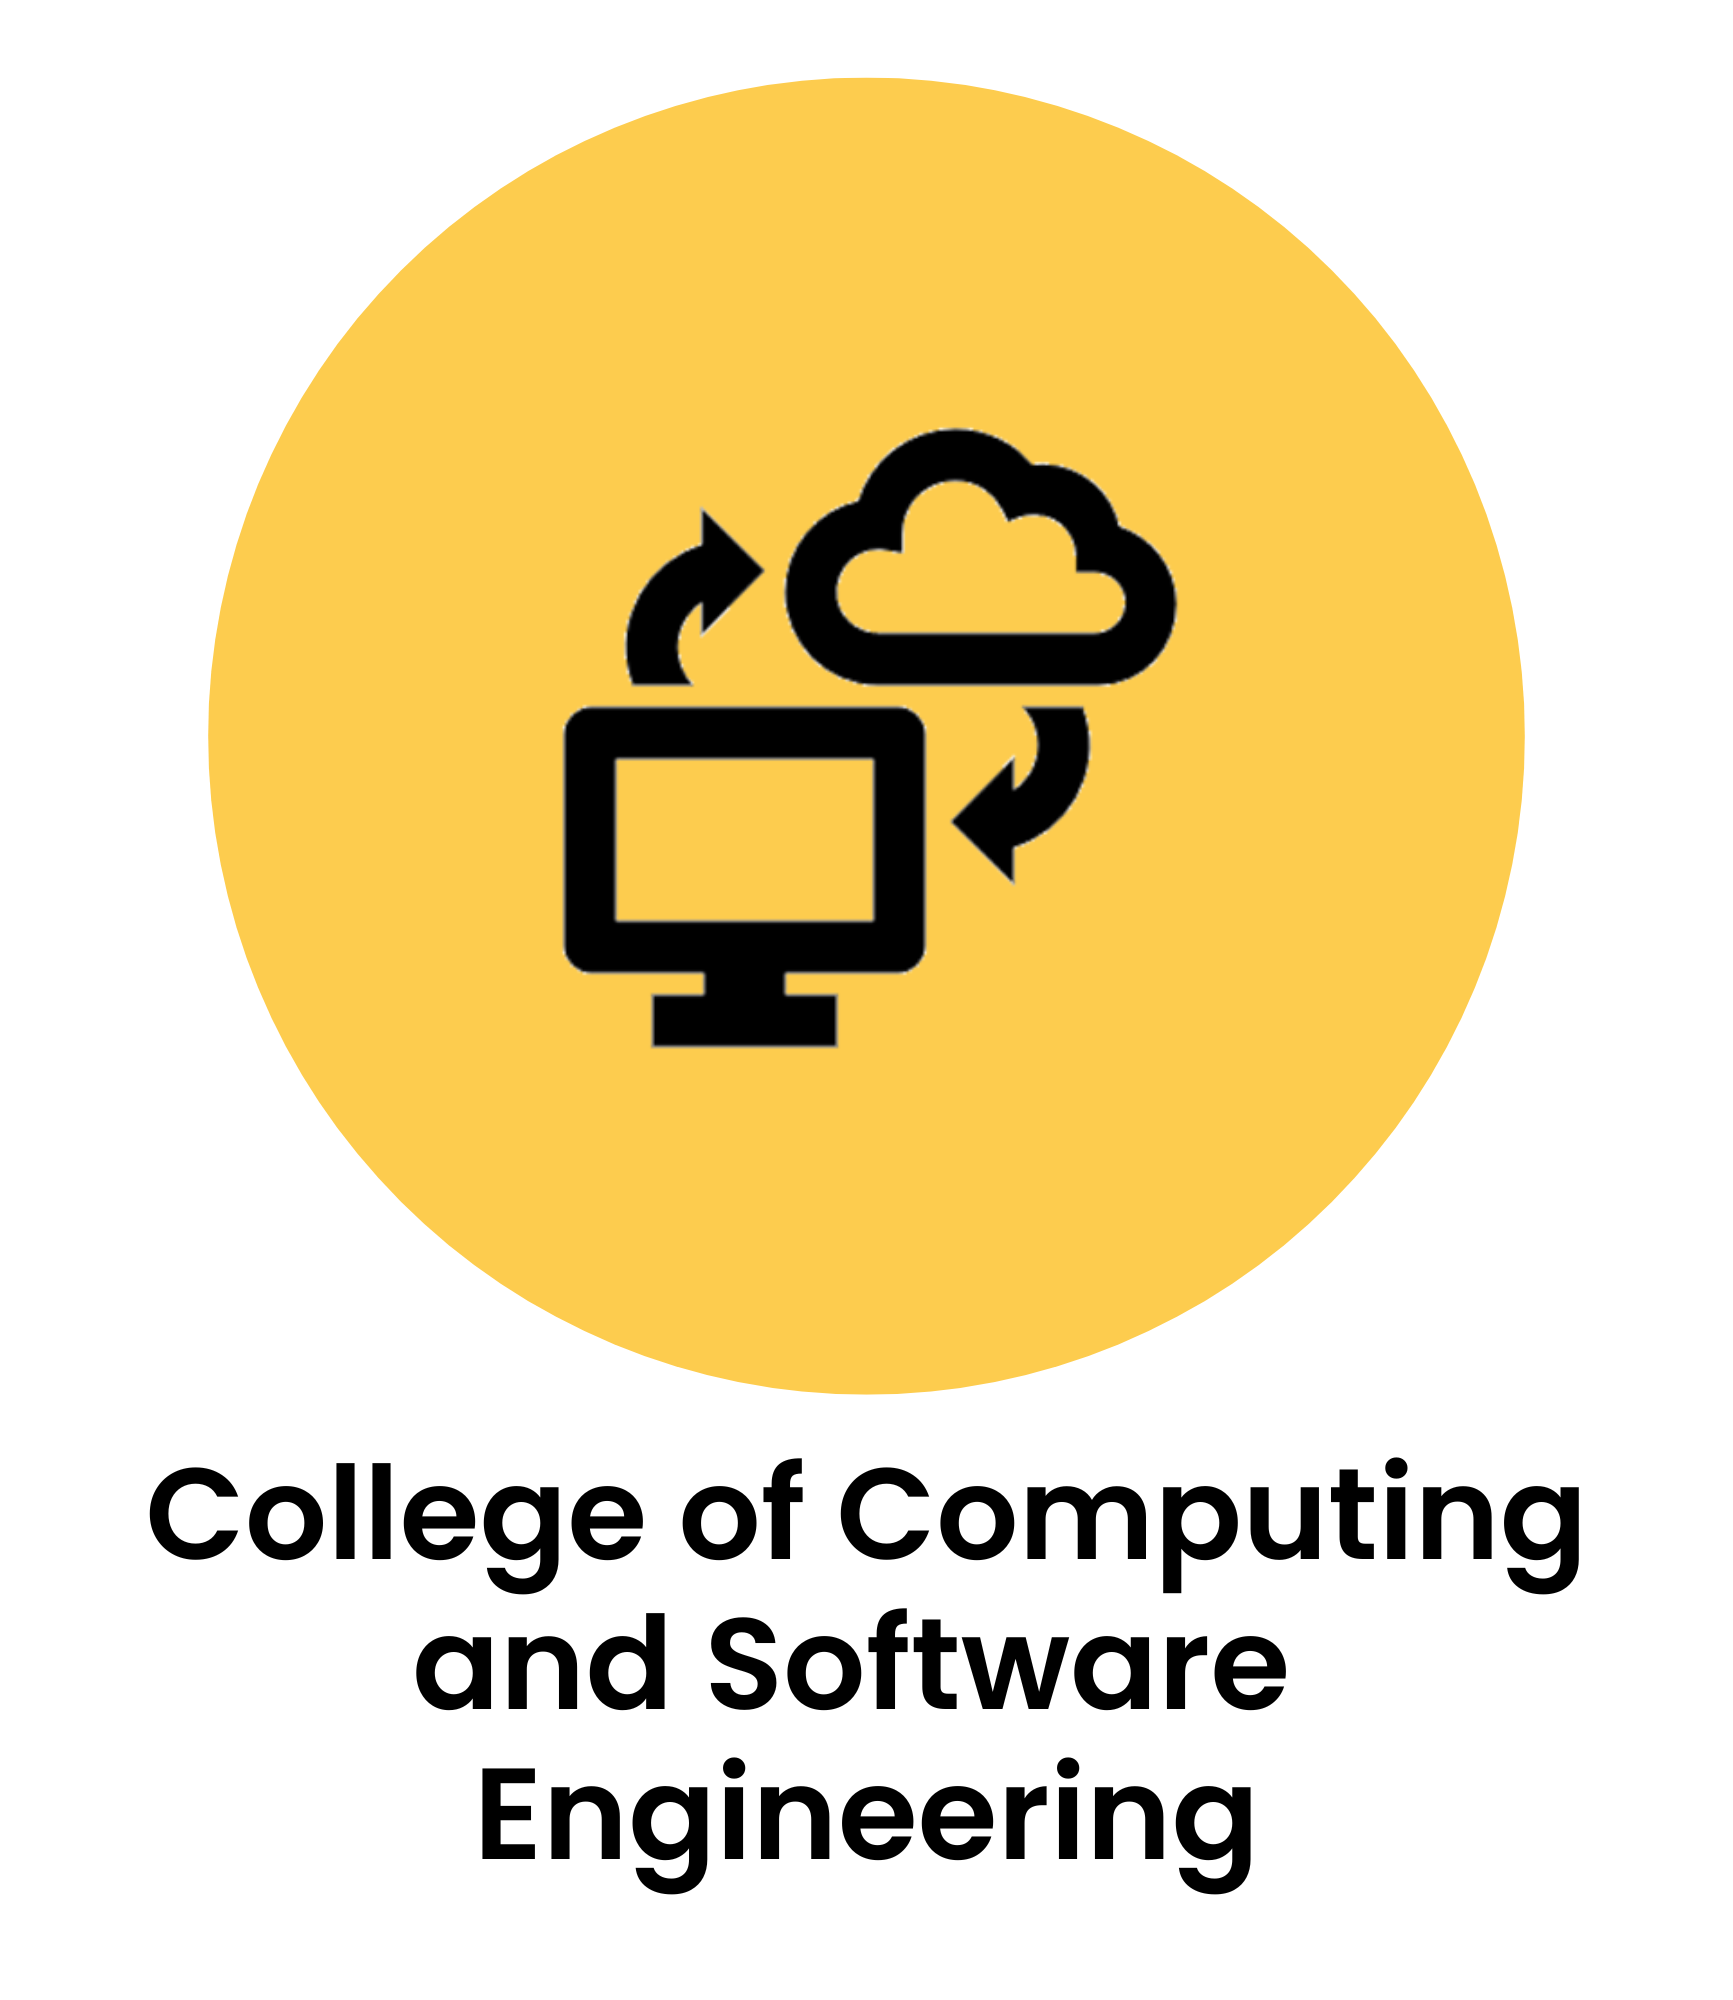 [text] College of Computing and Software Engineering